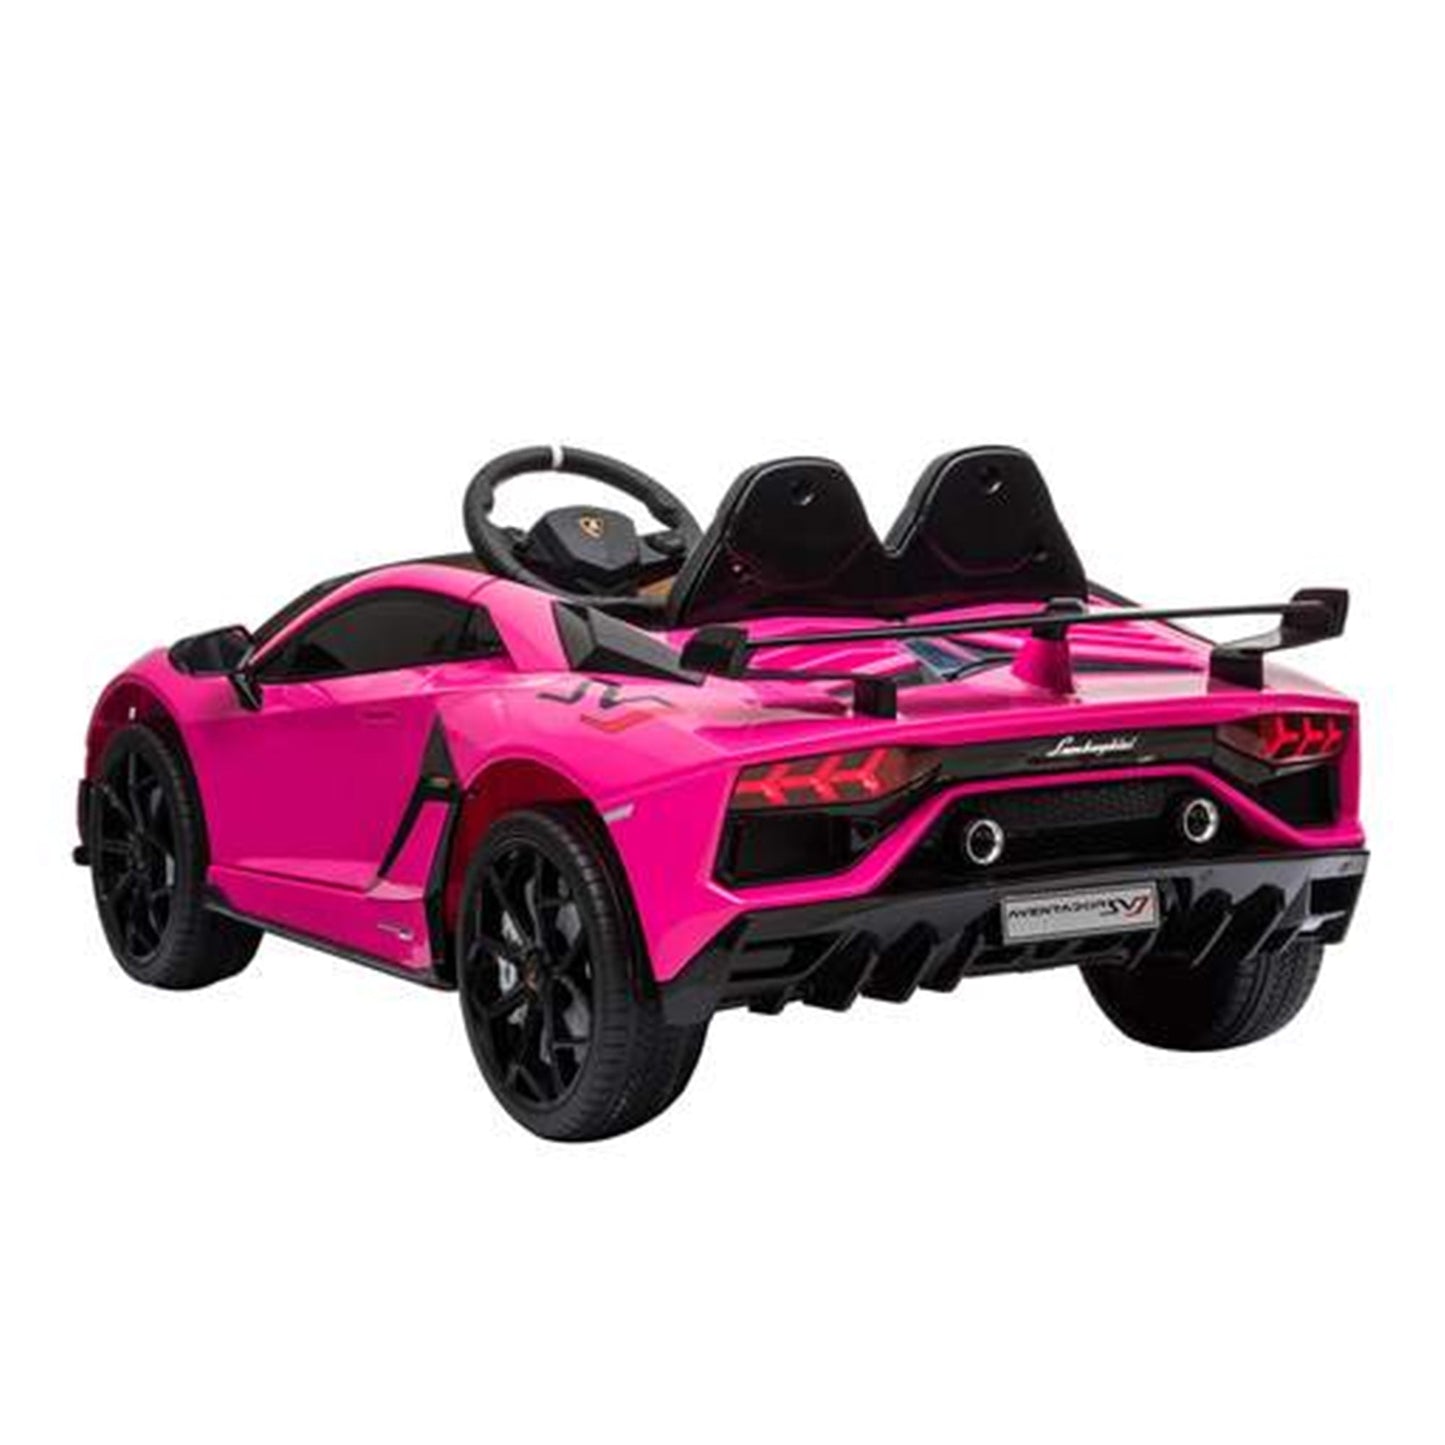 "Lamborghini SVJ official ride-on car from Kids Car store, showcased on a white background."